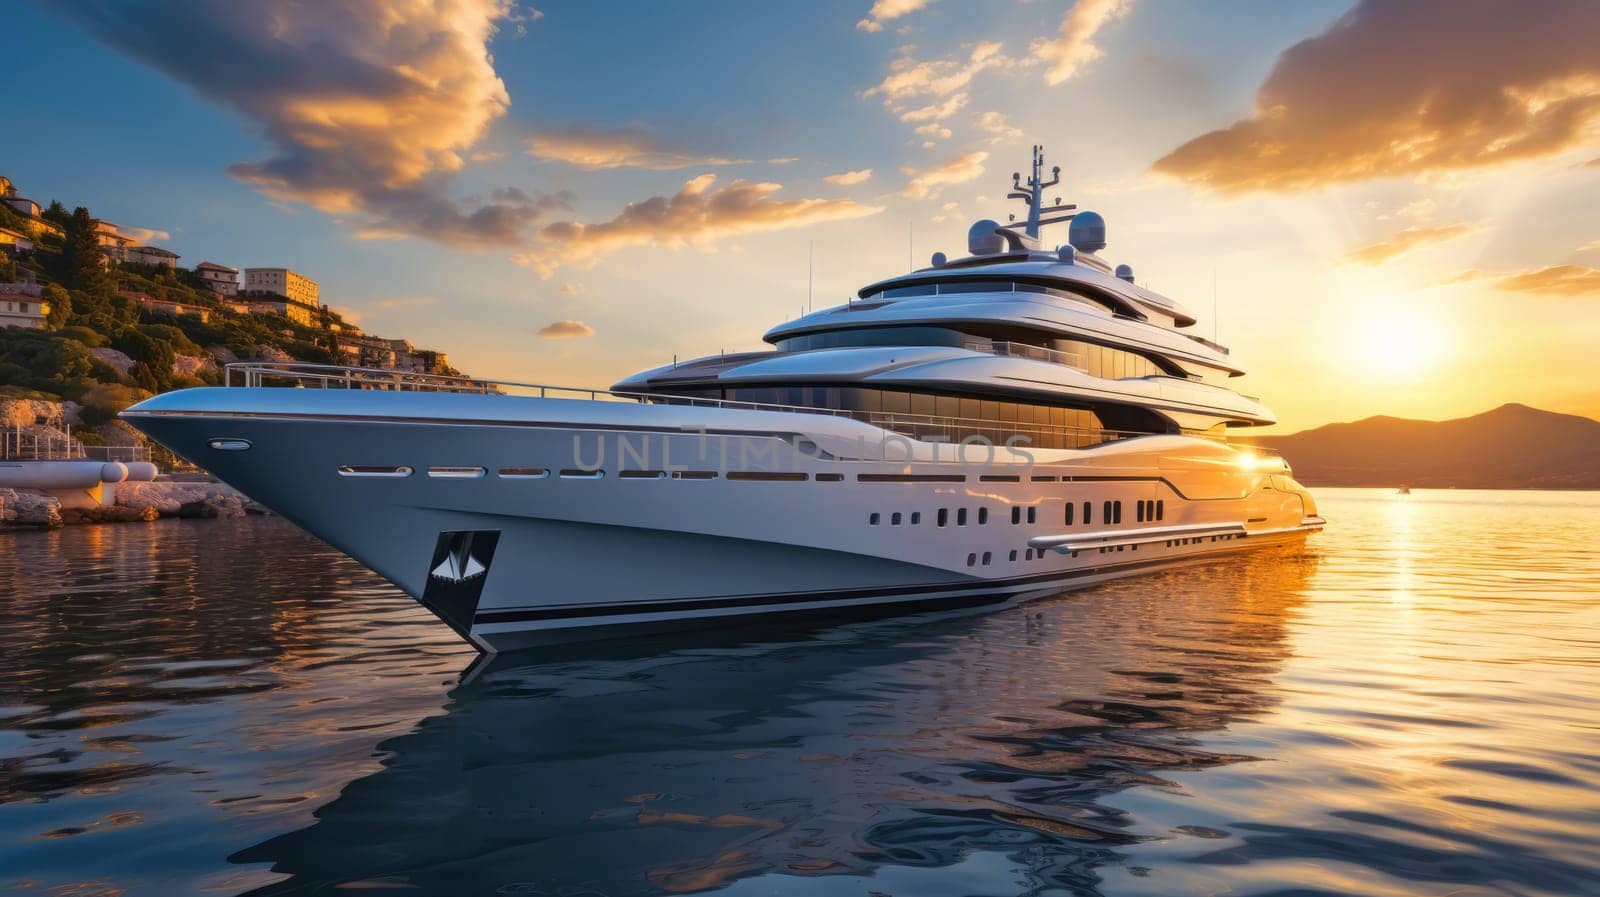 Luxury yacht docked at sunset, calm ocean, exclusive seafaring lifestyle, moored in harbor, tranquil marine scene, opulence.